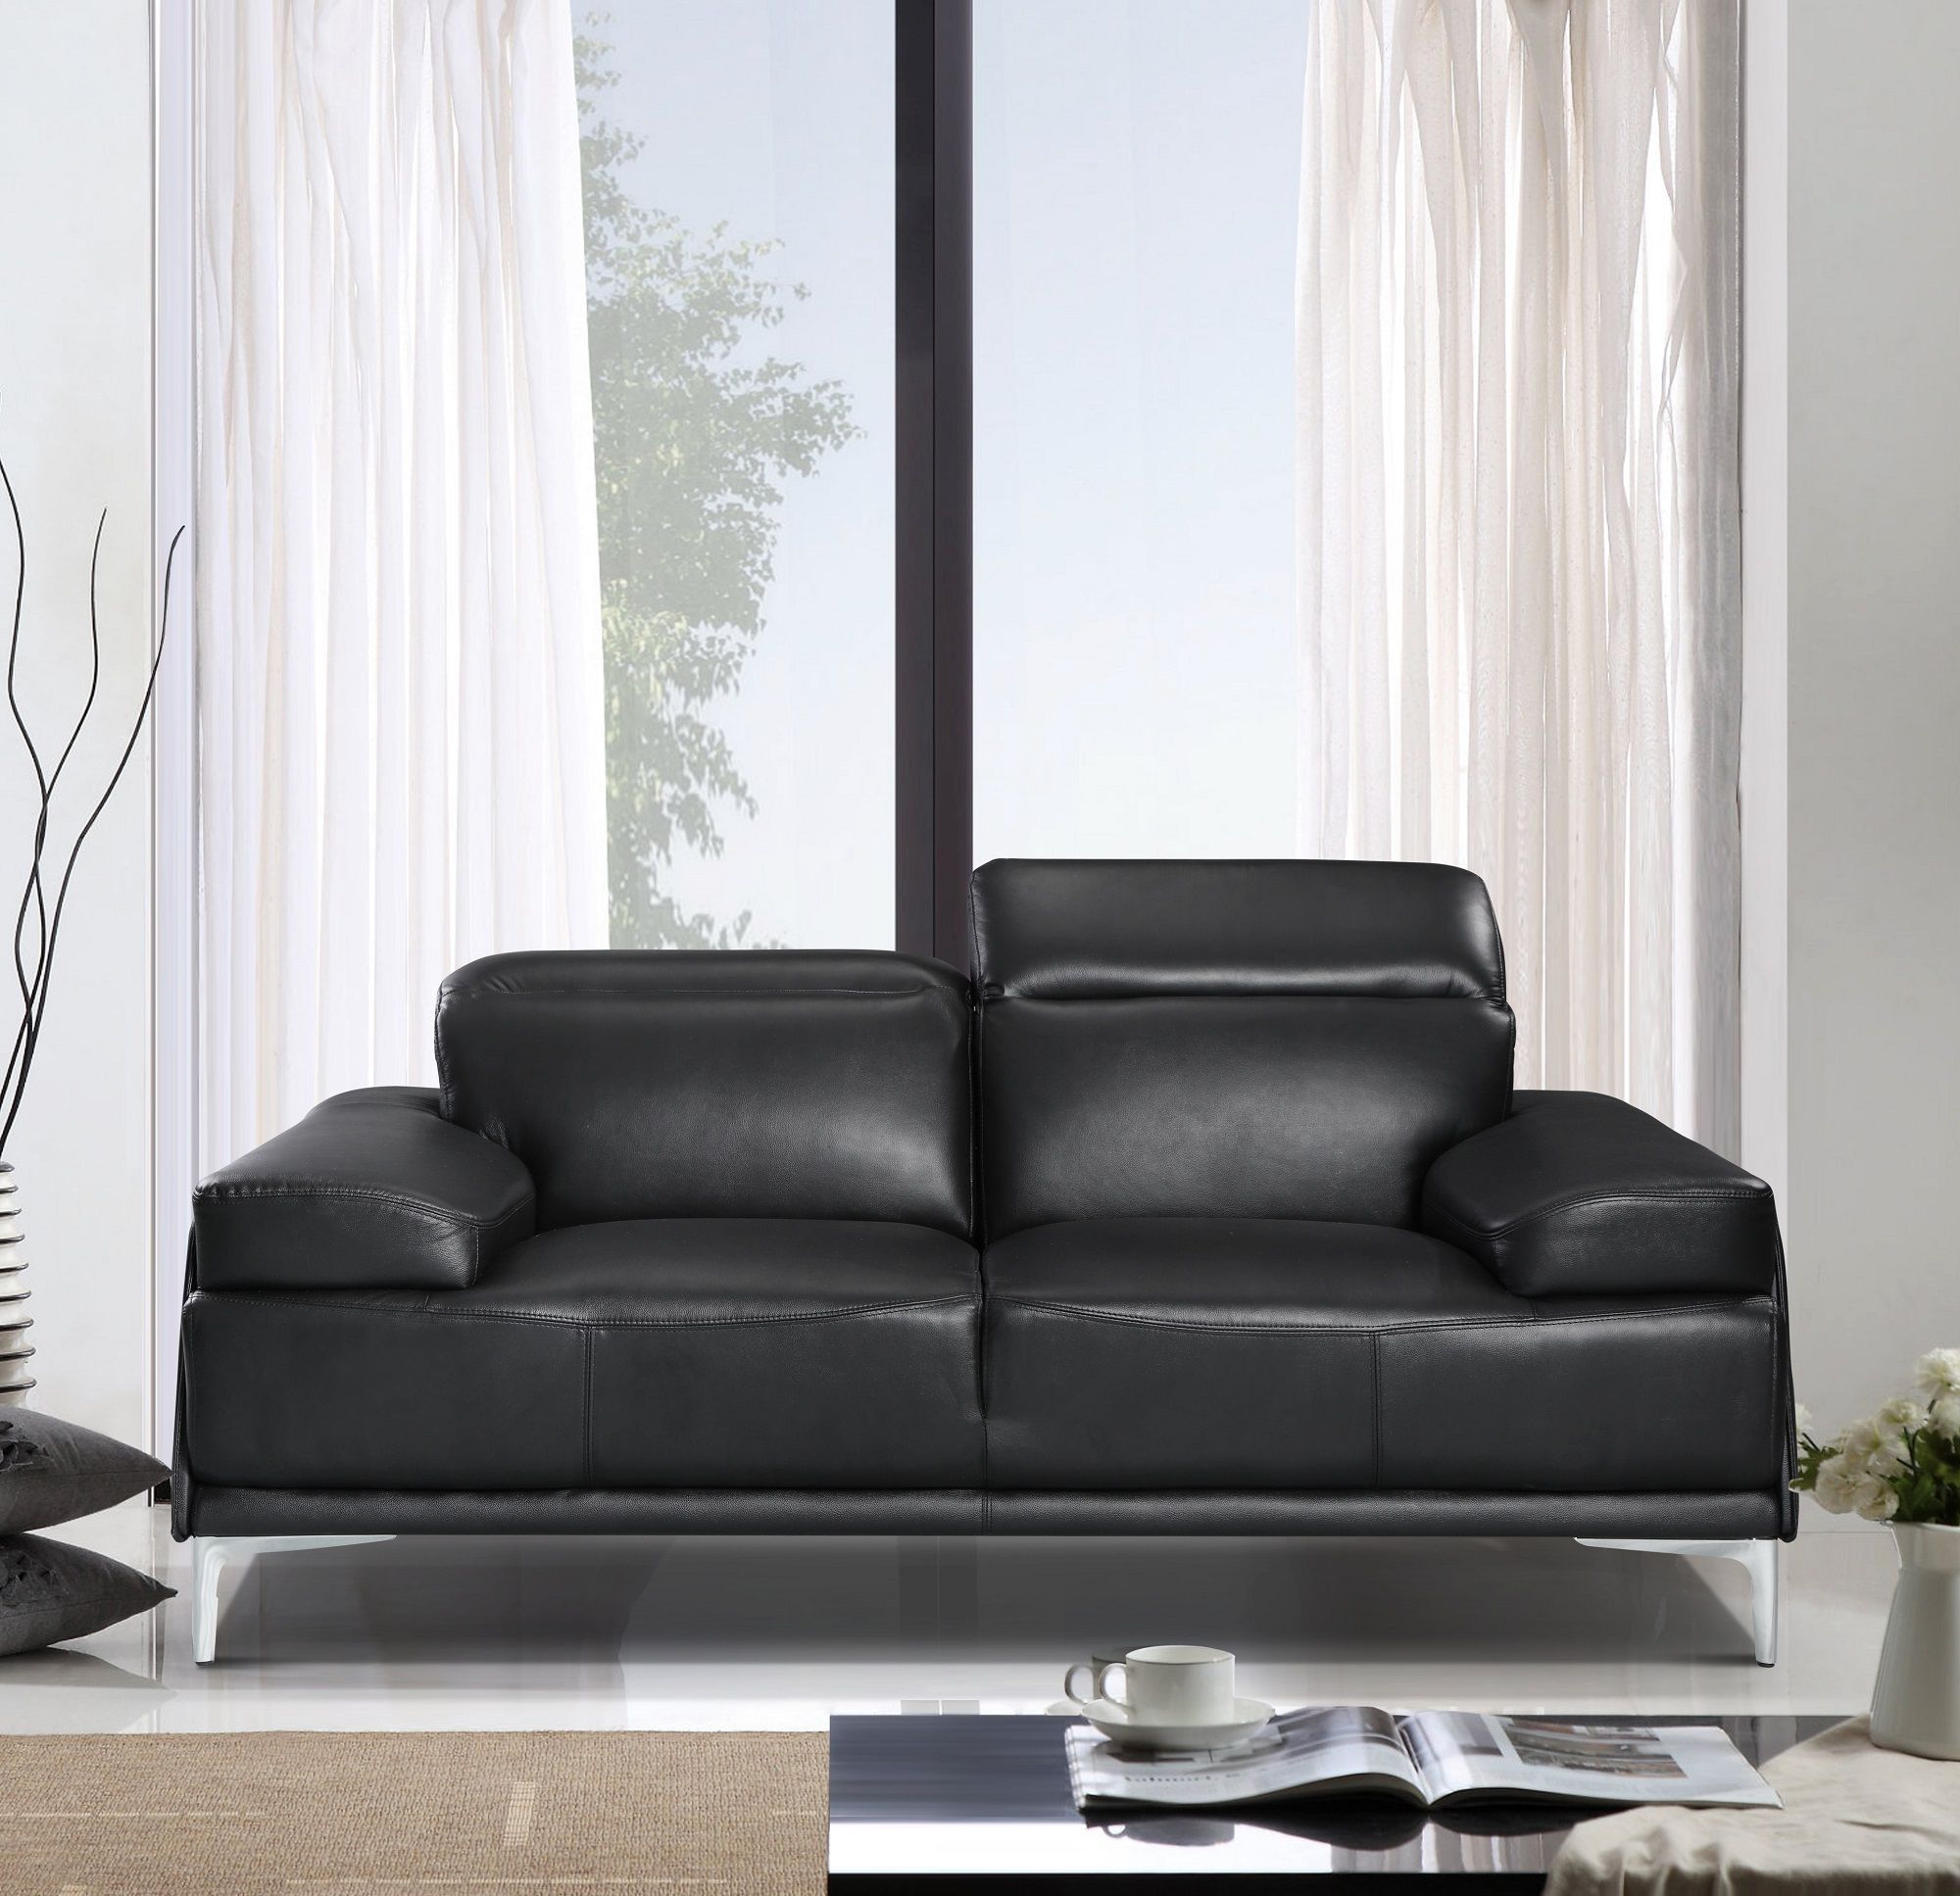 Contemporary Black Leather Living Room Sofa Set Minneapolis Minnesota J Intended For Right Facing Black Sofas (Gallery 6 of 20)